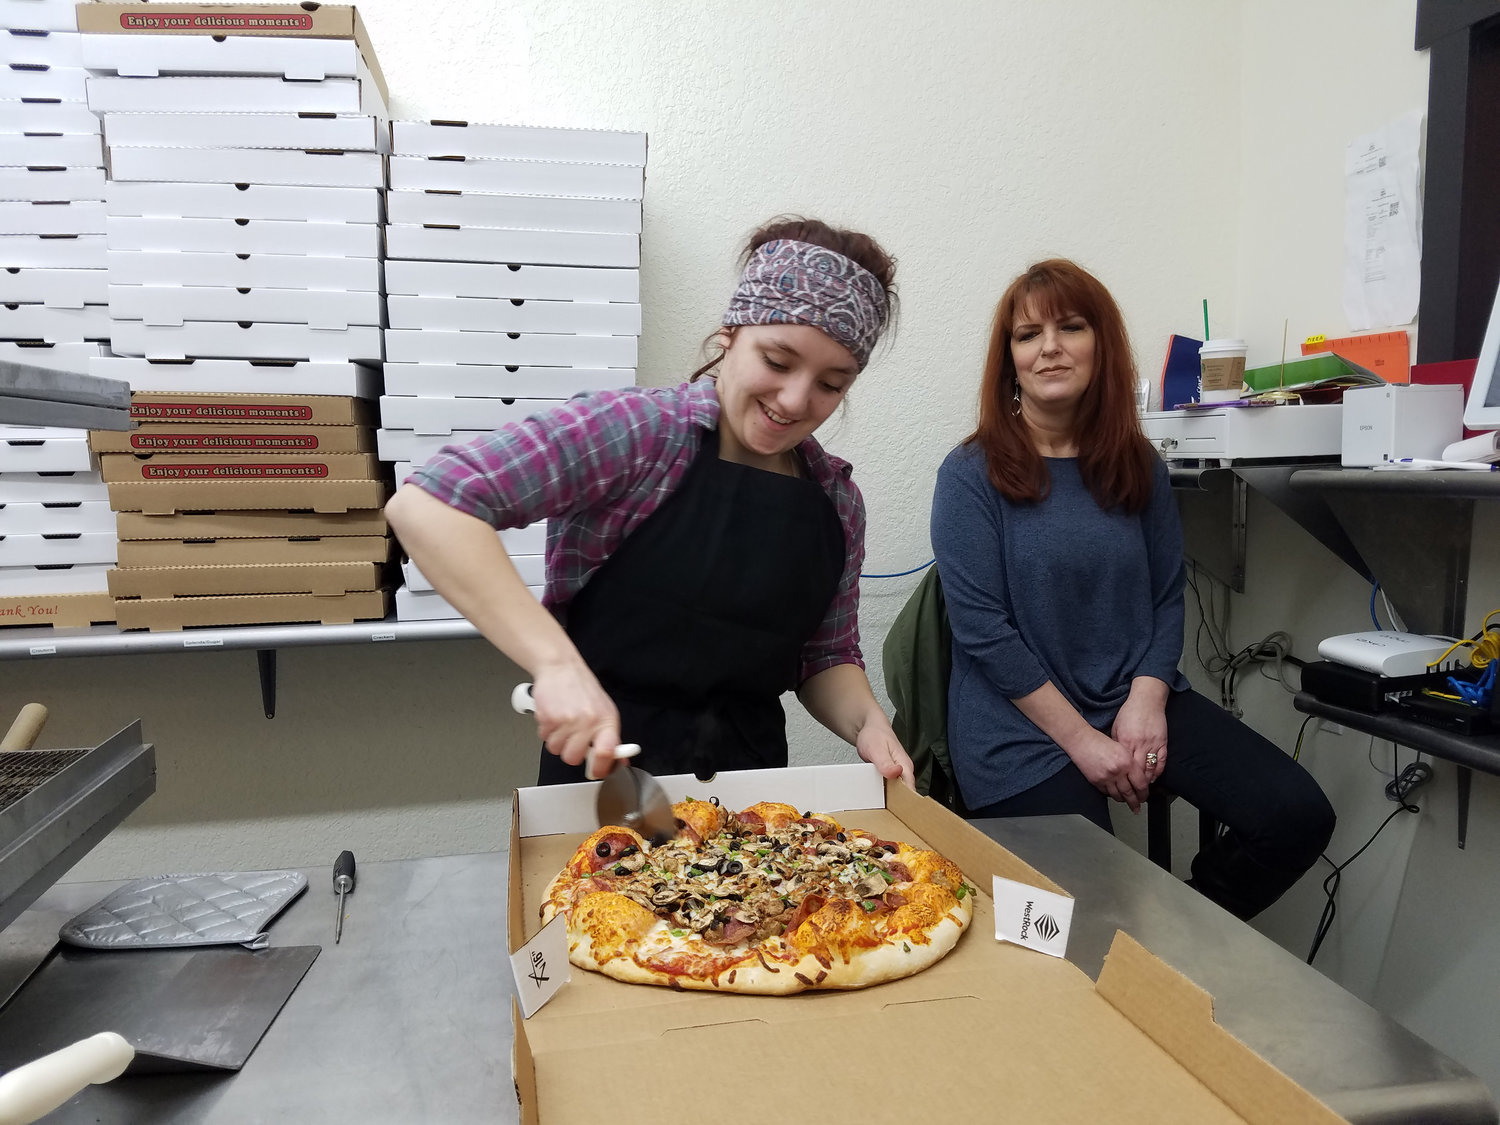 Kaitlyn Bornstein cuts a completed pizza while business owner Kay Merino looks on at Maverick's Pizza in Centralia. The pizza shop offers dine-in, take-out and bake-at-home pizzas and hopes to soon offer delivery.